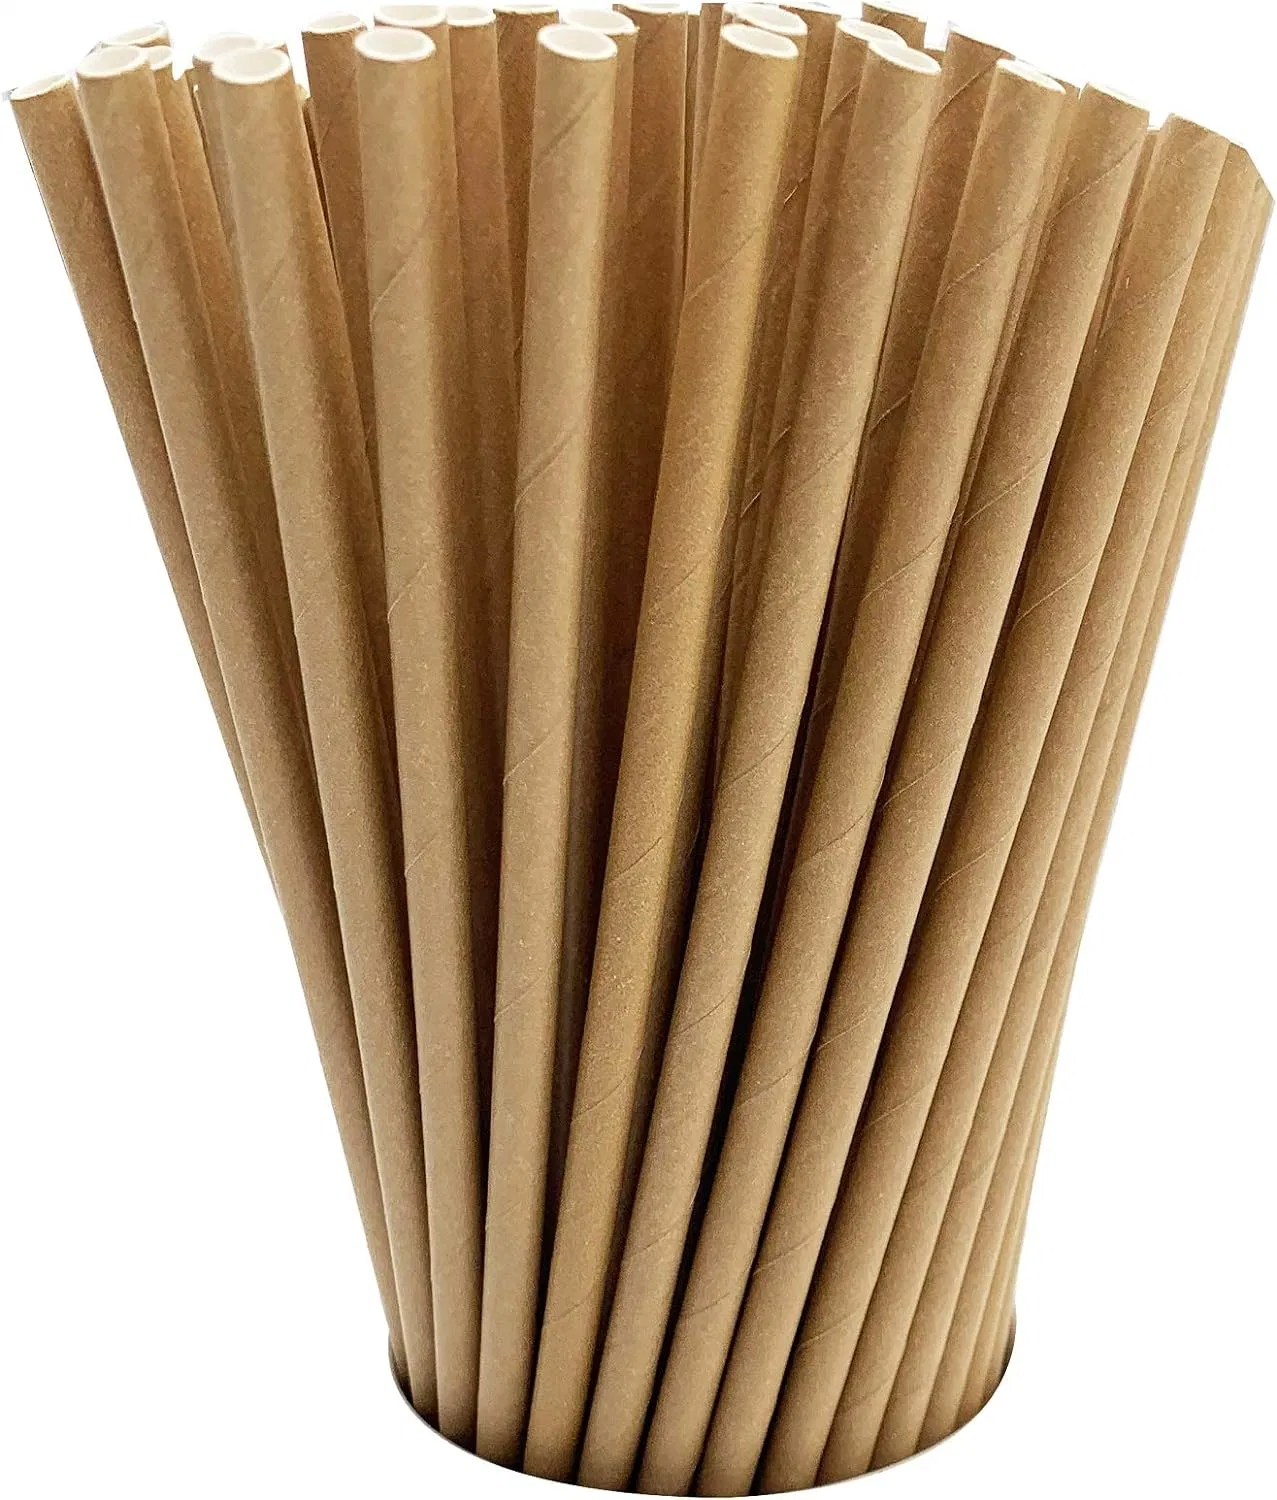 Wholesale/Supplier Disposable Biodegradable Kraft Paper Drinking Straws